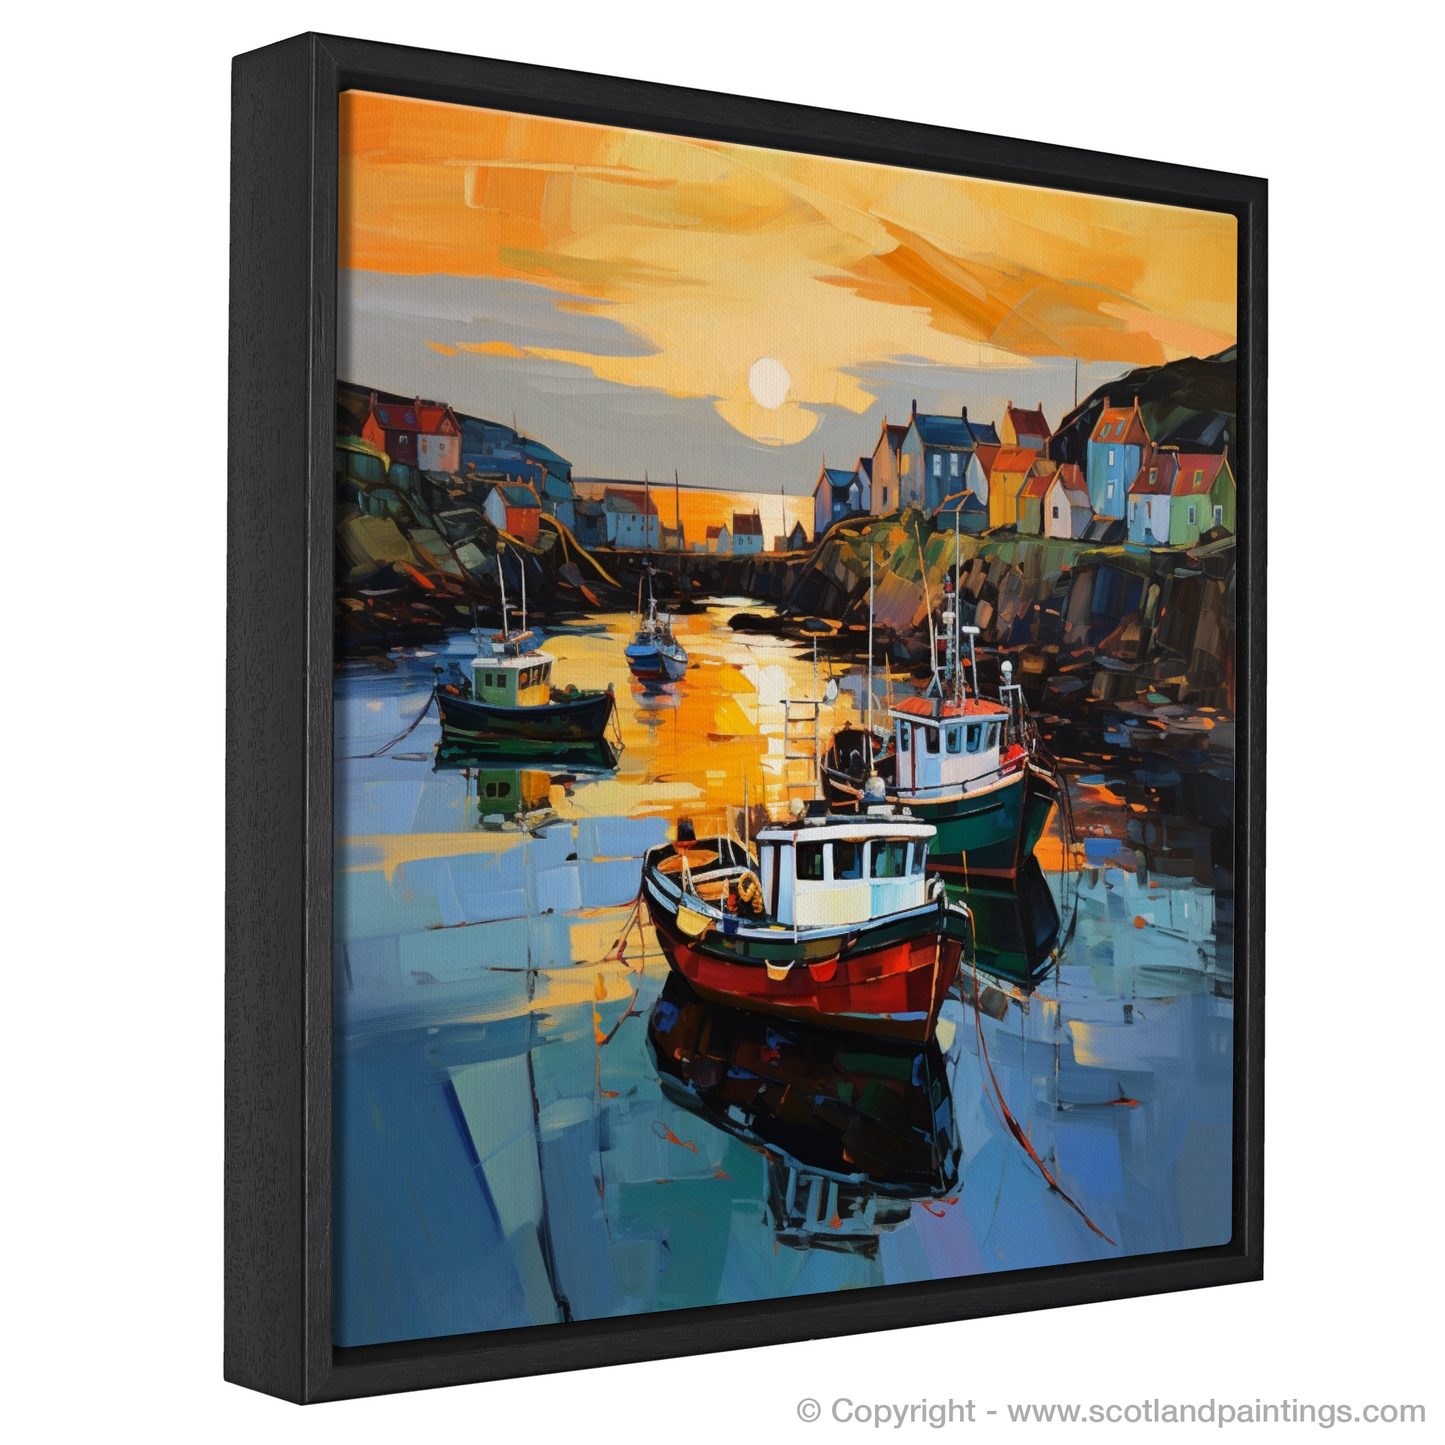 Painting and Art Print of Portnahaven Harbour at dusk entitled "Dusk Embrace at Portnahaven Harbour".